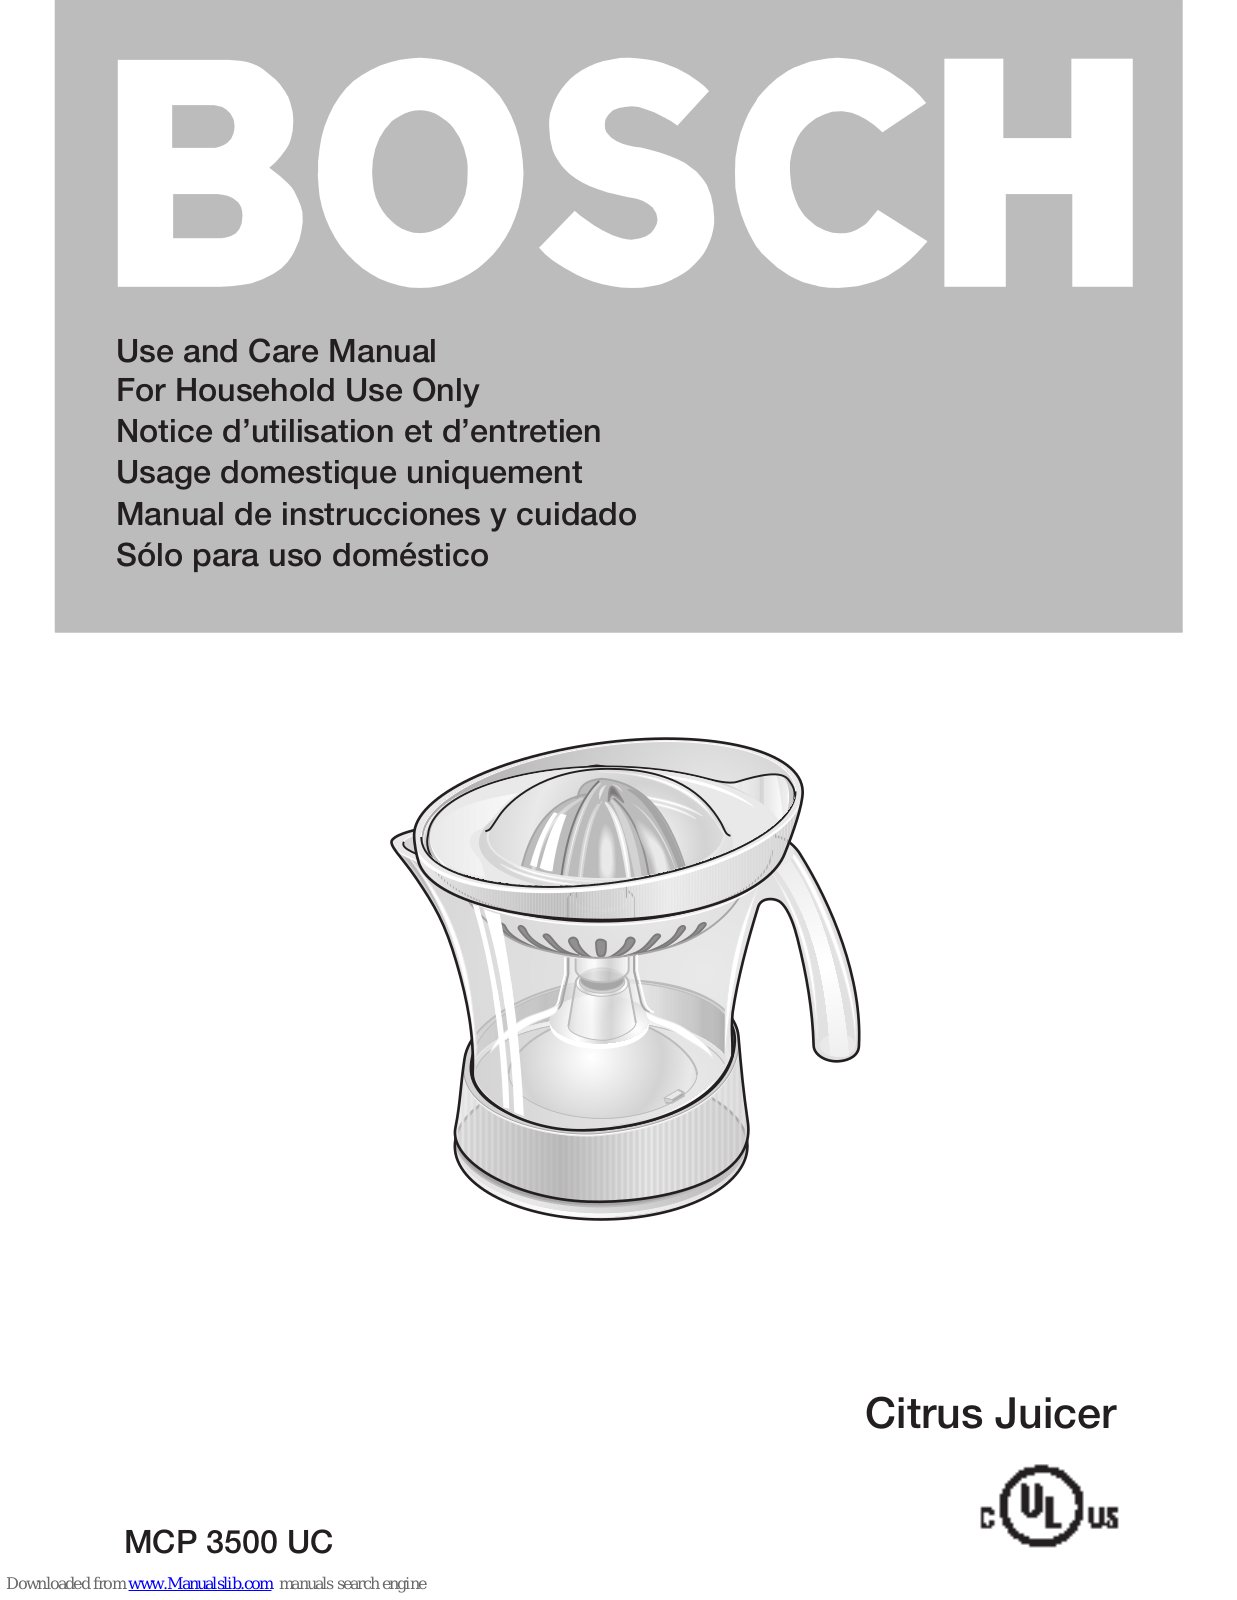 Bosch MCP 3500 UC Use And Care Manual